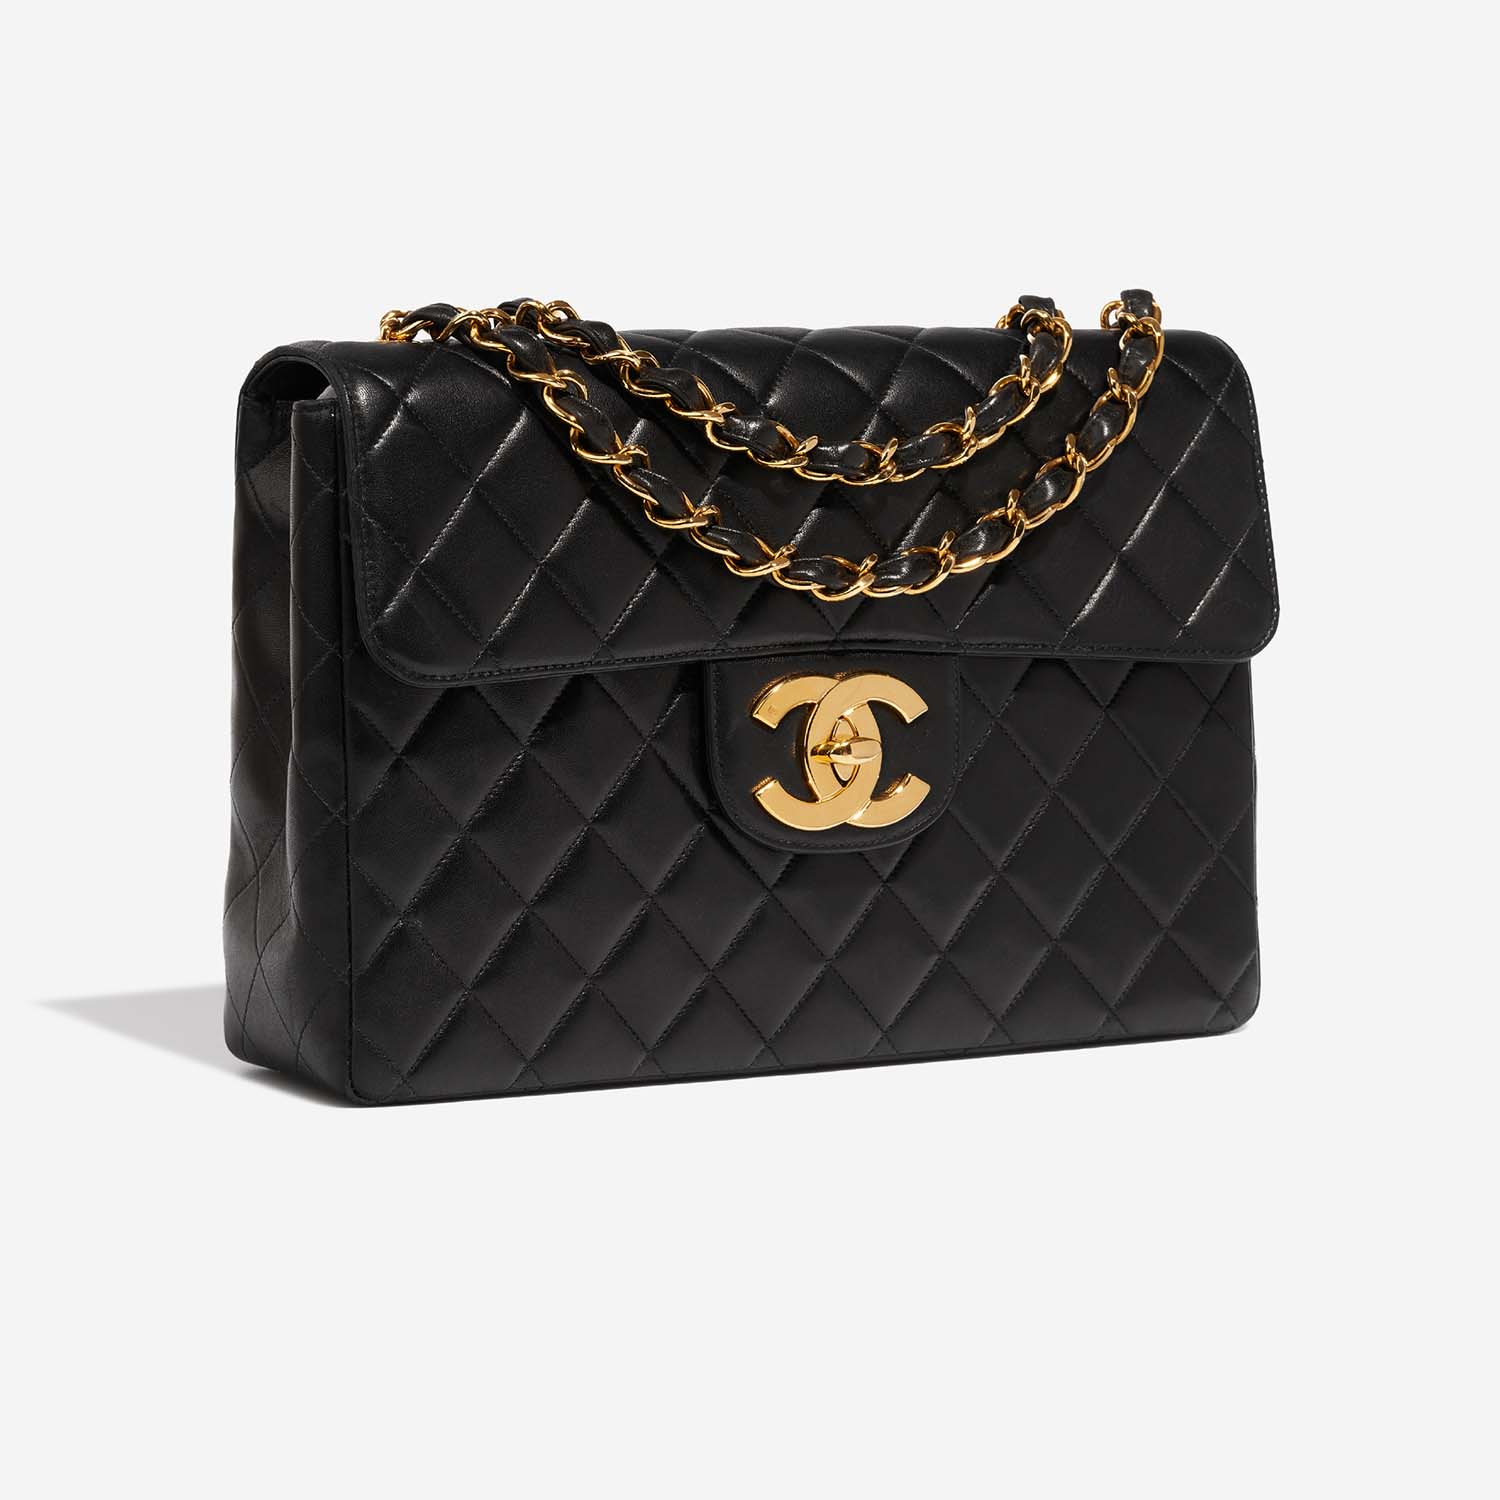 quilted black leather chanel purse